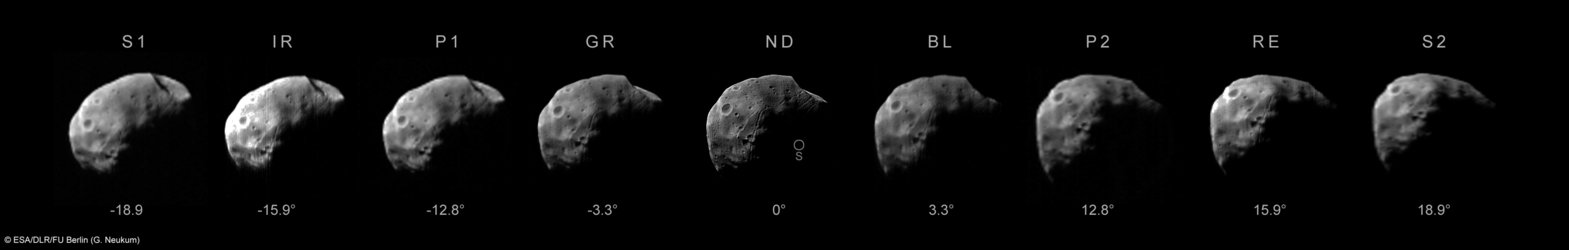 Phobos imaged by HRSC’s nine imaging channels